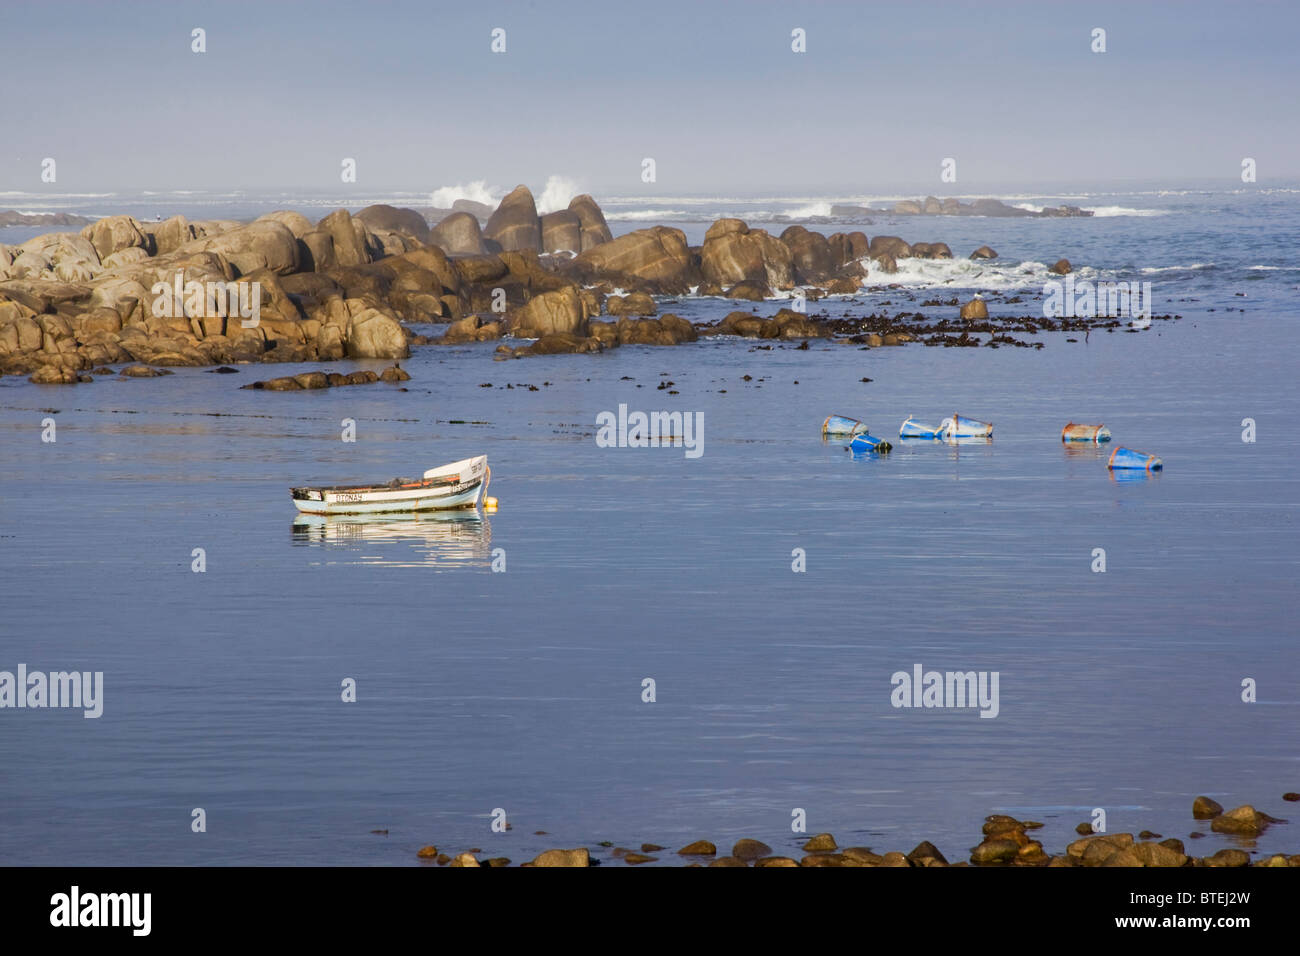 Crayfish traps and a wooden boat on the water at Jacobsbaai Stock Photo